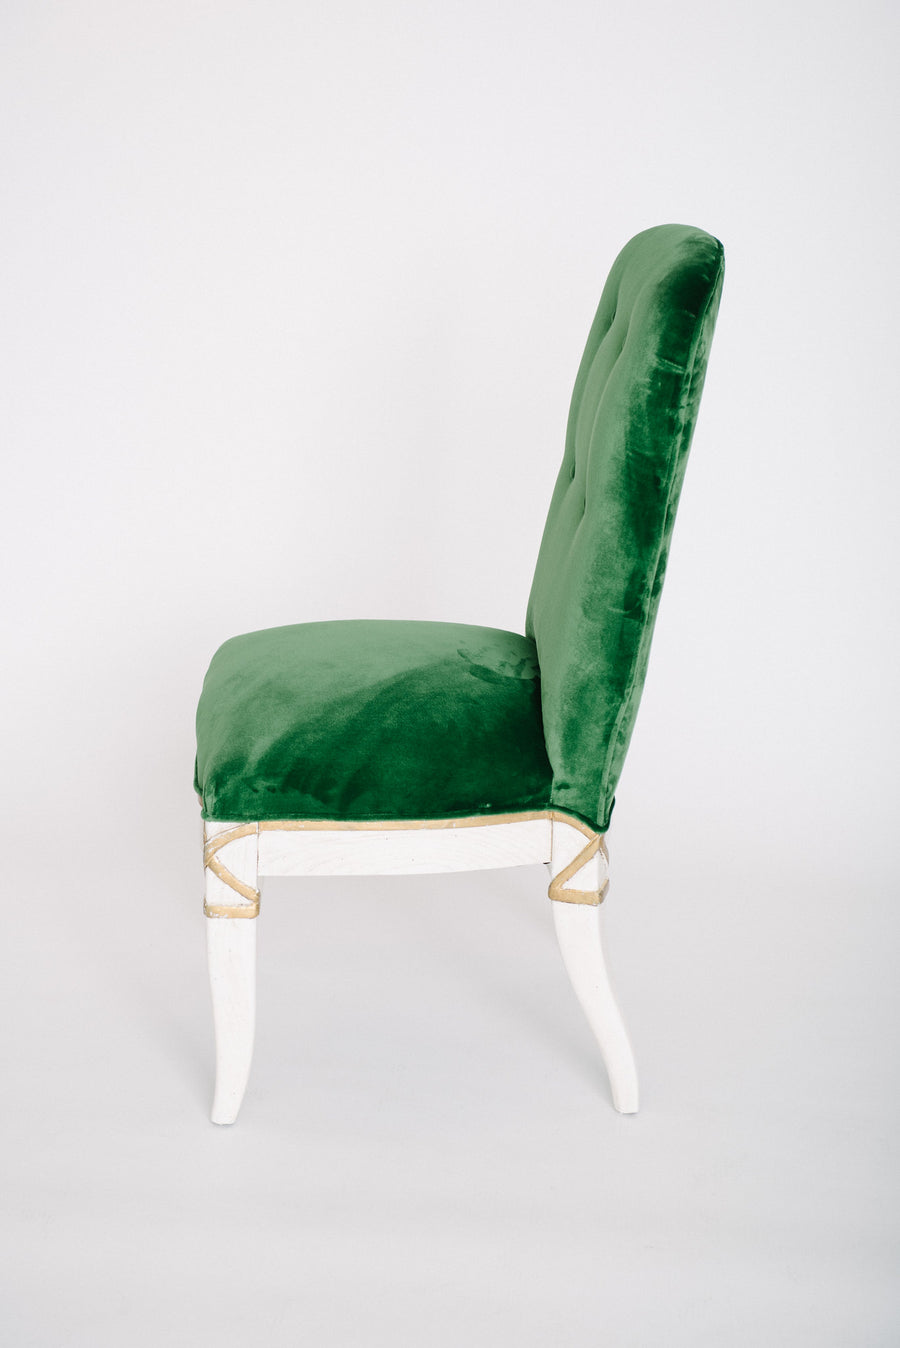 Set of 10 Marge Carson Emerald Green Velvet Dining Chairs